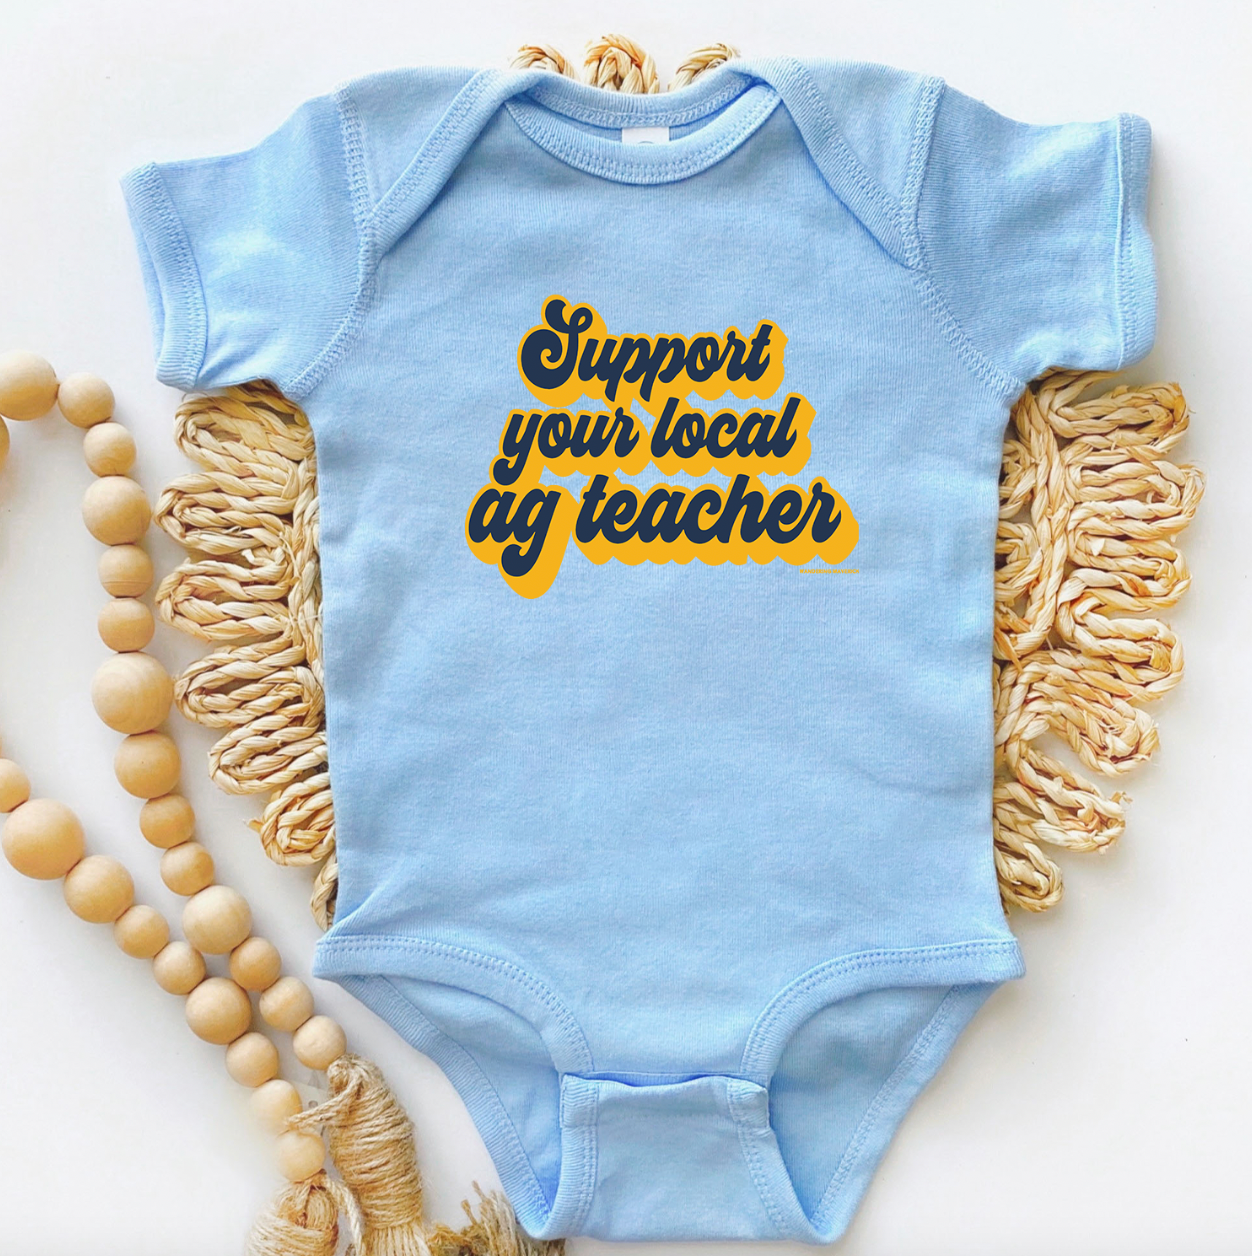 Retro Support Your Local Ag Teacher Navy & Gold One Piece/T-Shirt (Newborn - Youth XL) - Multiple Colors!